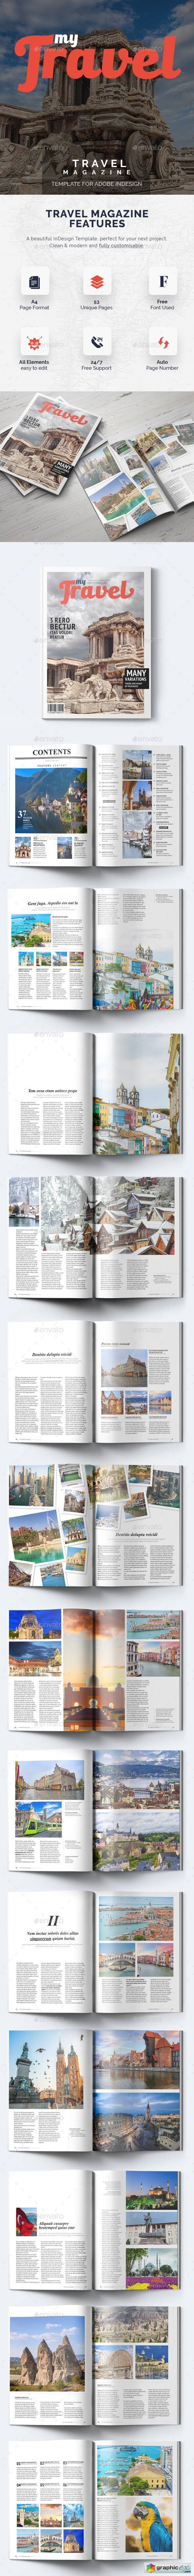 My Travel - 53 Pages Magazine Template